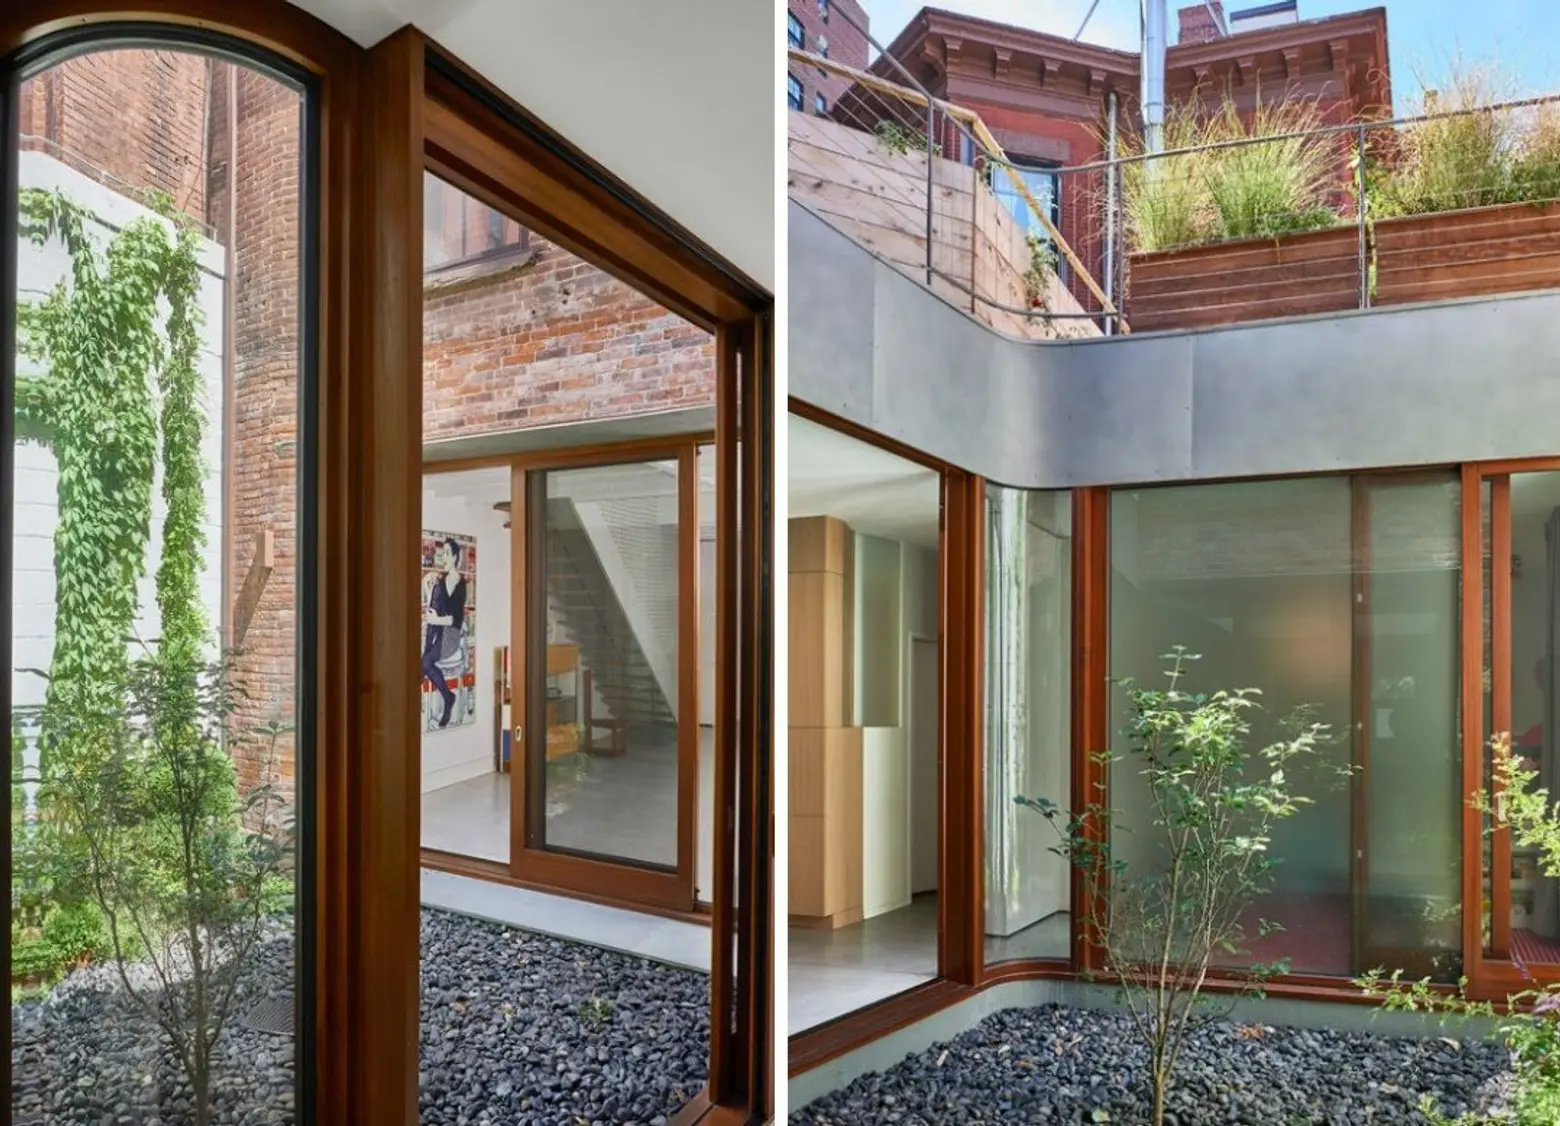 O'Neill McVoy Architects, Clinton Hill, Townhouse, Architecture, Courtyard, Skylight, Carriage house, interiors